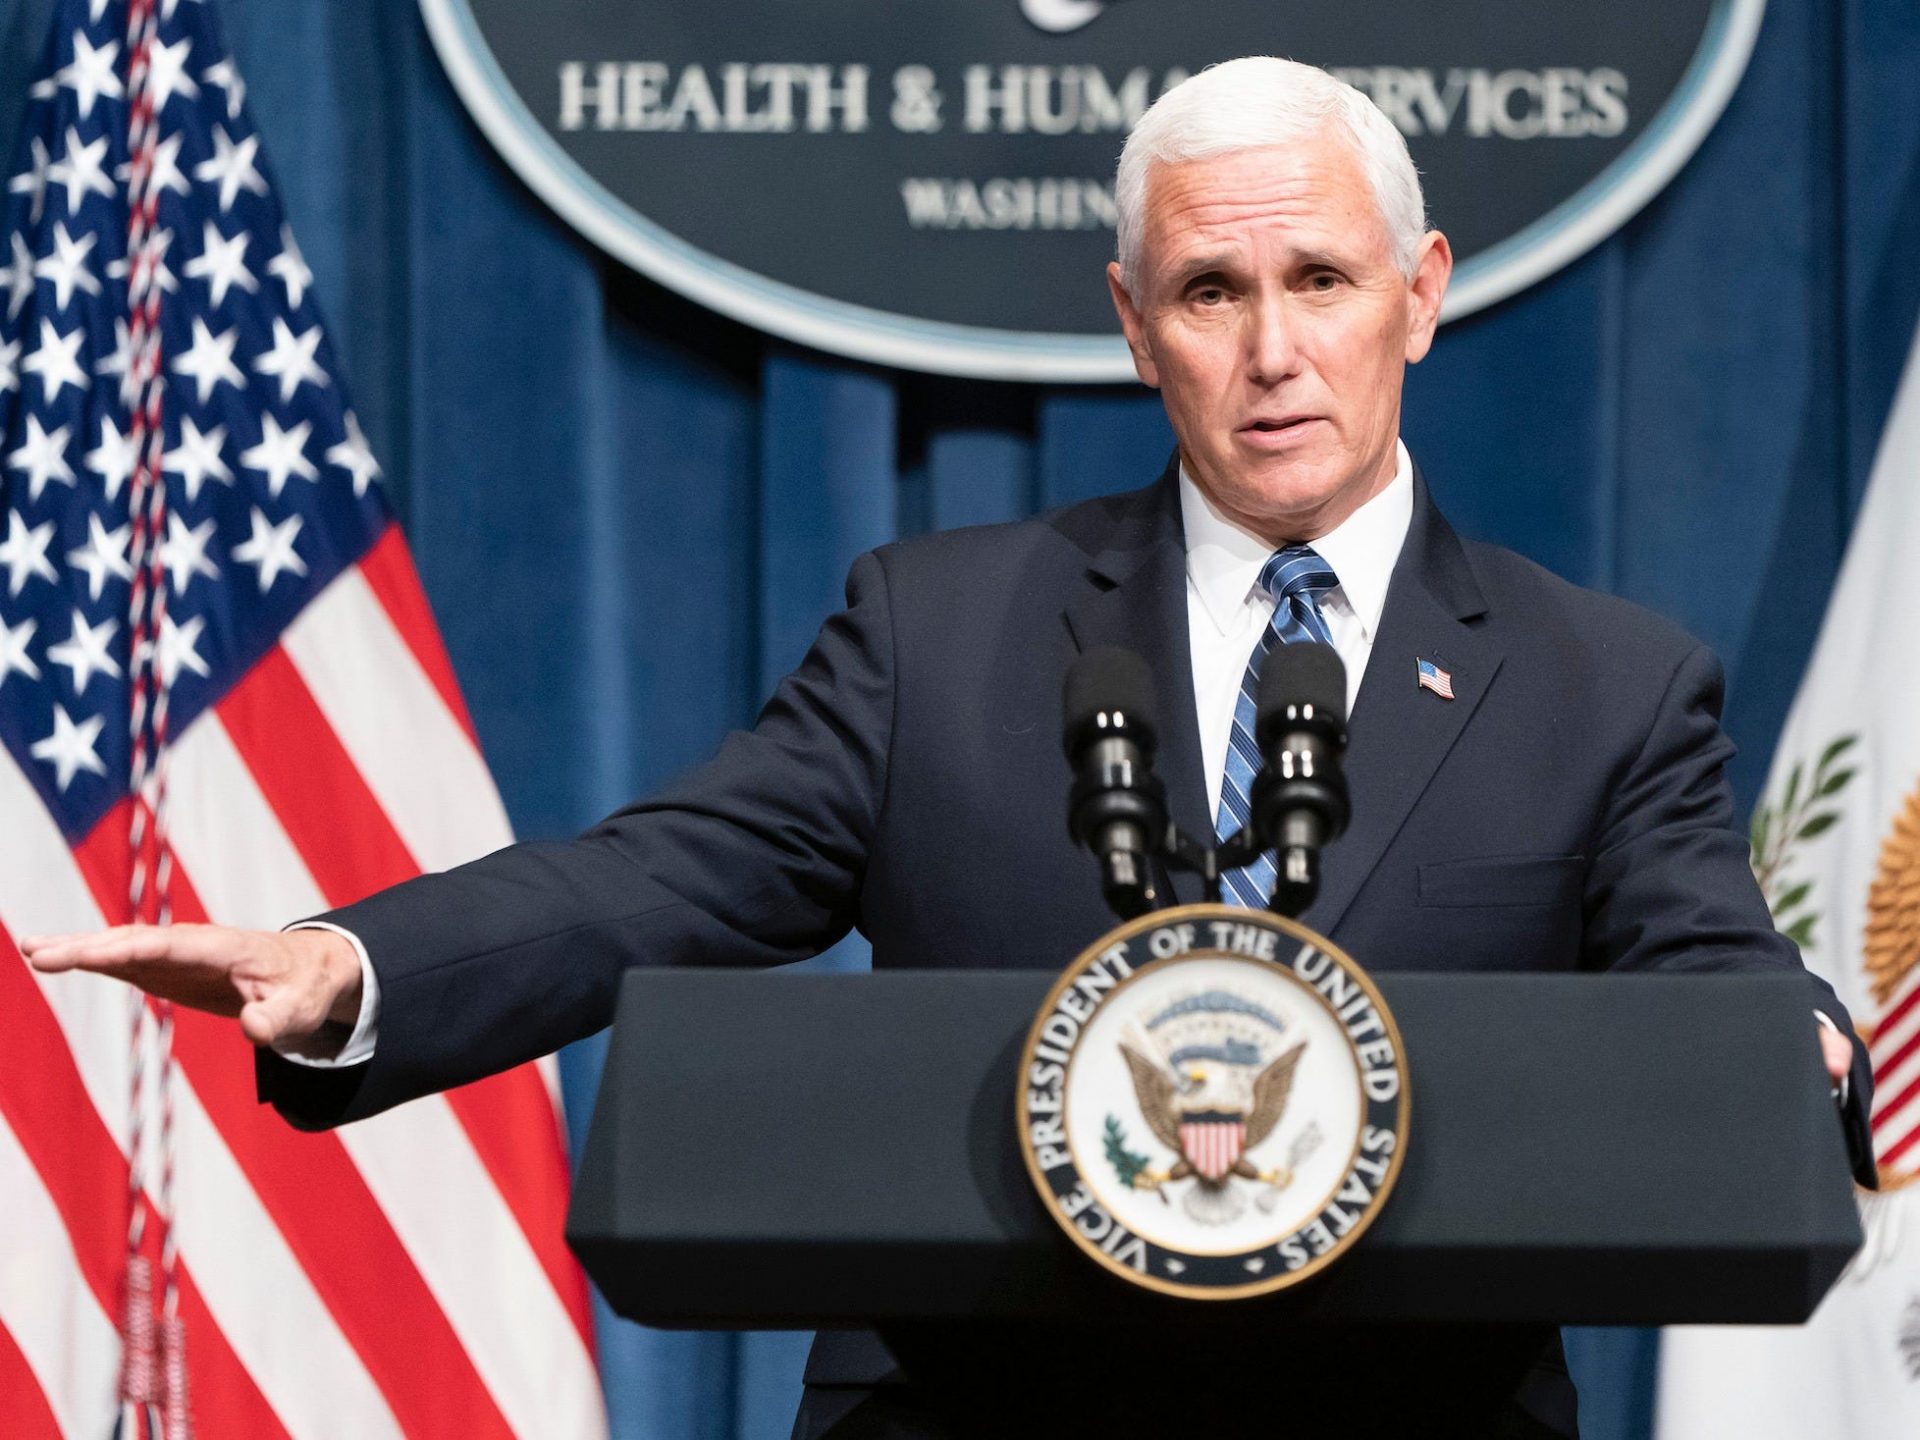 2 doctors from a viral video peddling spurious or deceptive coronavirus data announce they met with Vice President Mike Pence